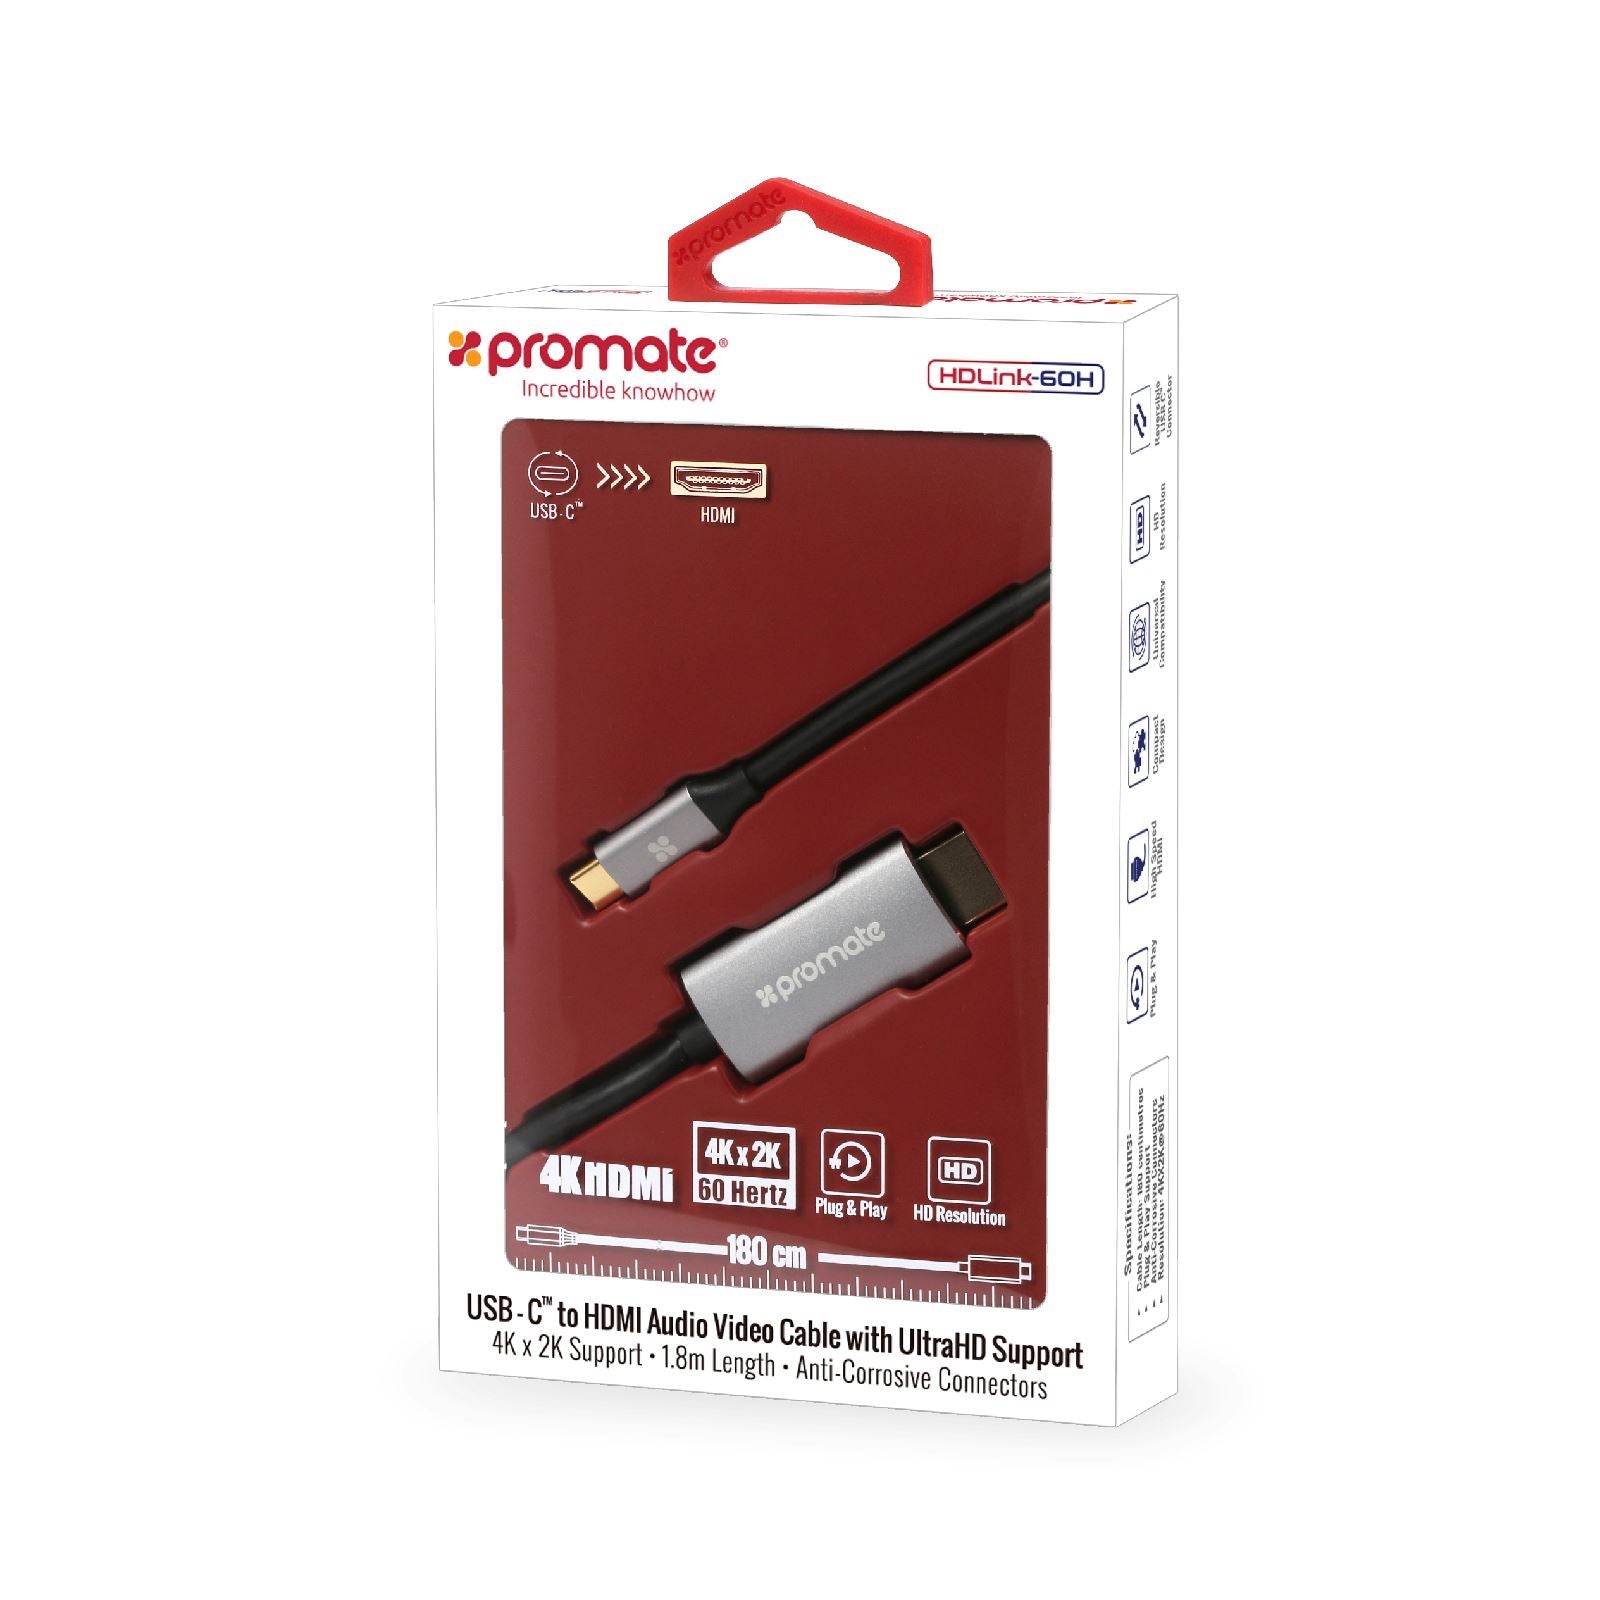 PROMATE_1.8m_4K_USB-C_to_HDMI_Cable_with_Gold_Plated_Connectors._Supports_Max_Res_up_to_4K@60Hz_(4096X2160)._Plug_&_Play._Grey_Colour. 1349